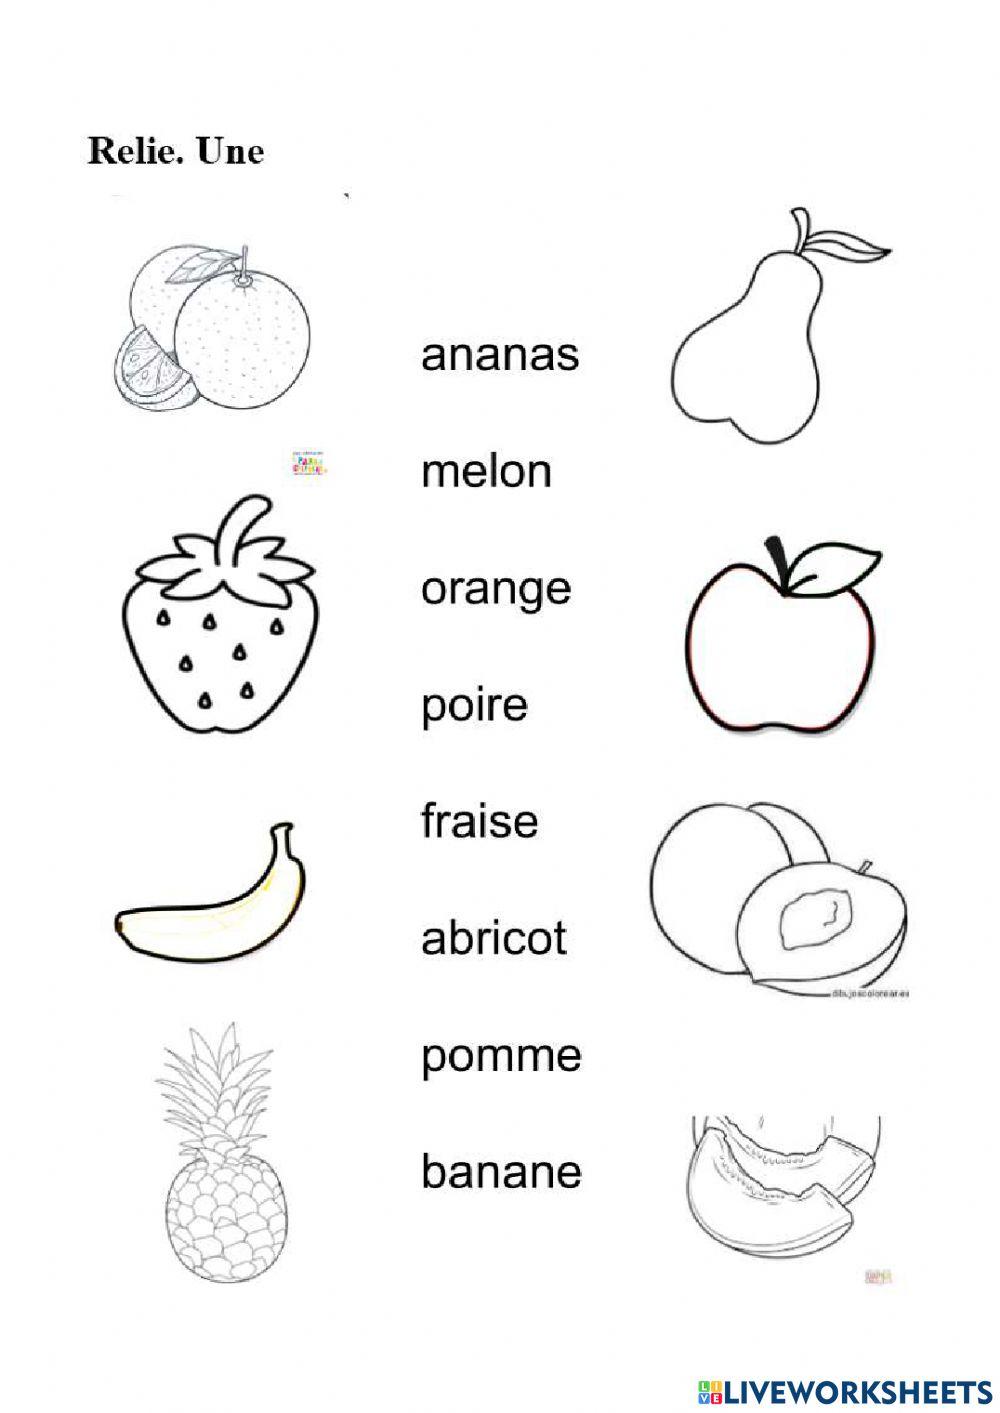 Les fruits interactive activity for Primer Ciclo | Live Worksheets